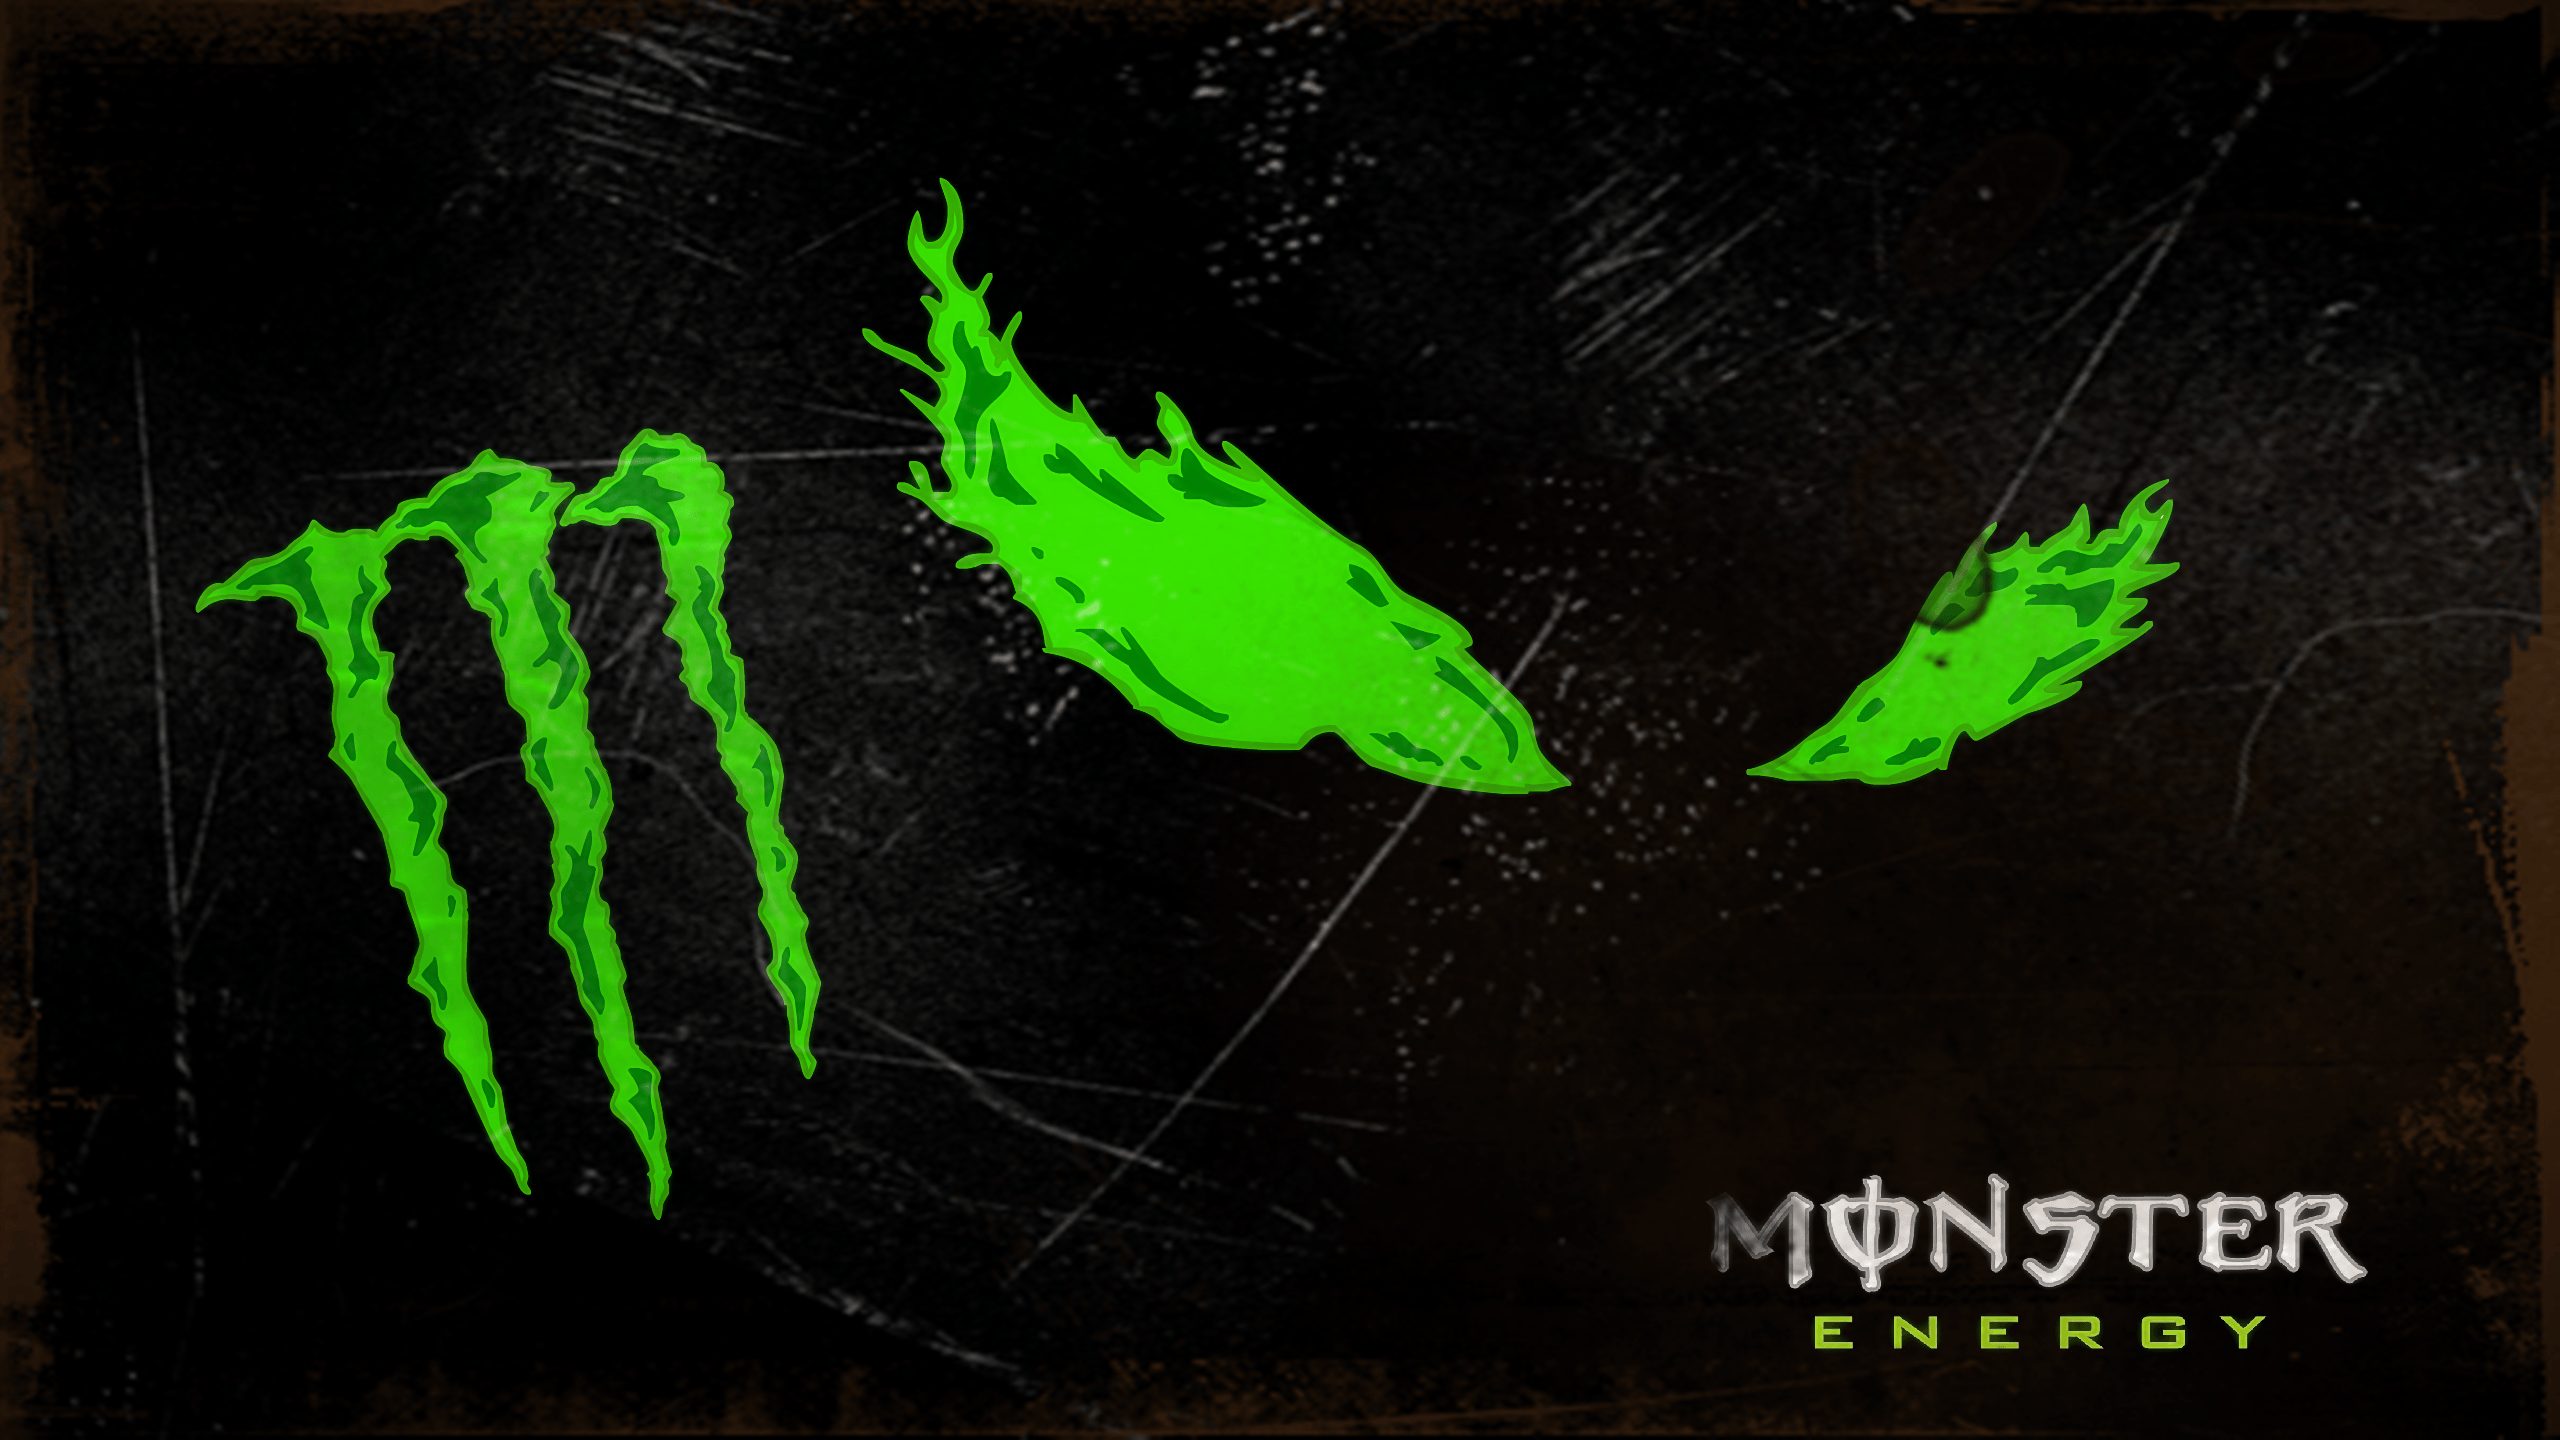 Cool Fox and Monster Logo - Amazing Monster Energy Eyes High Quality In HD Wallpaper | WALLSEV ...